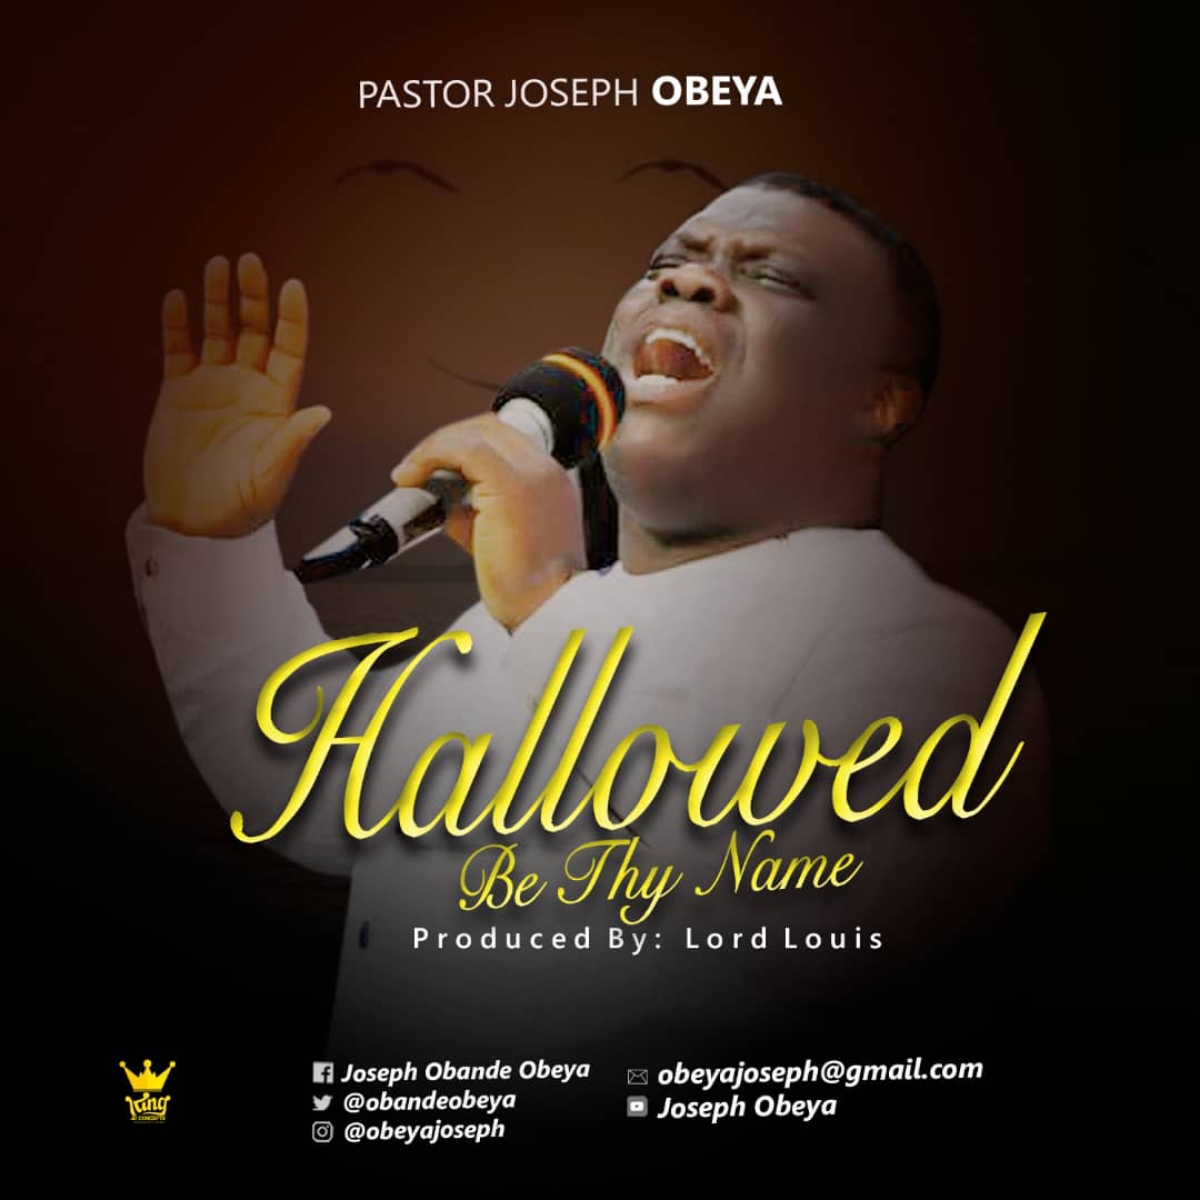 Hallowed Be Thy Name By Pastor Joseph Obeya